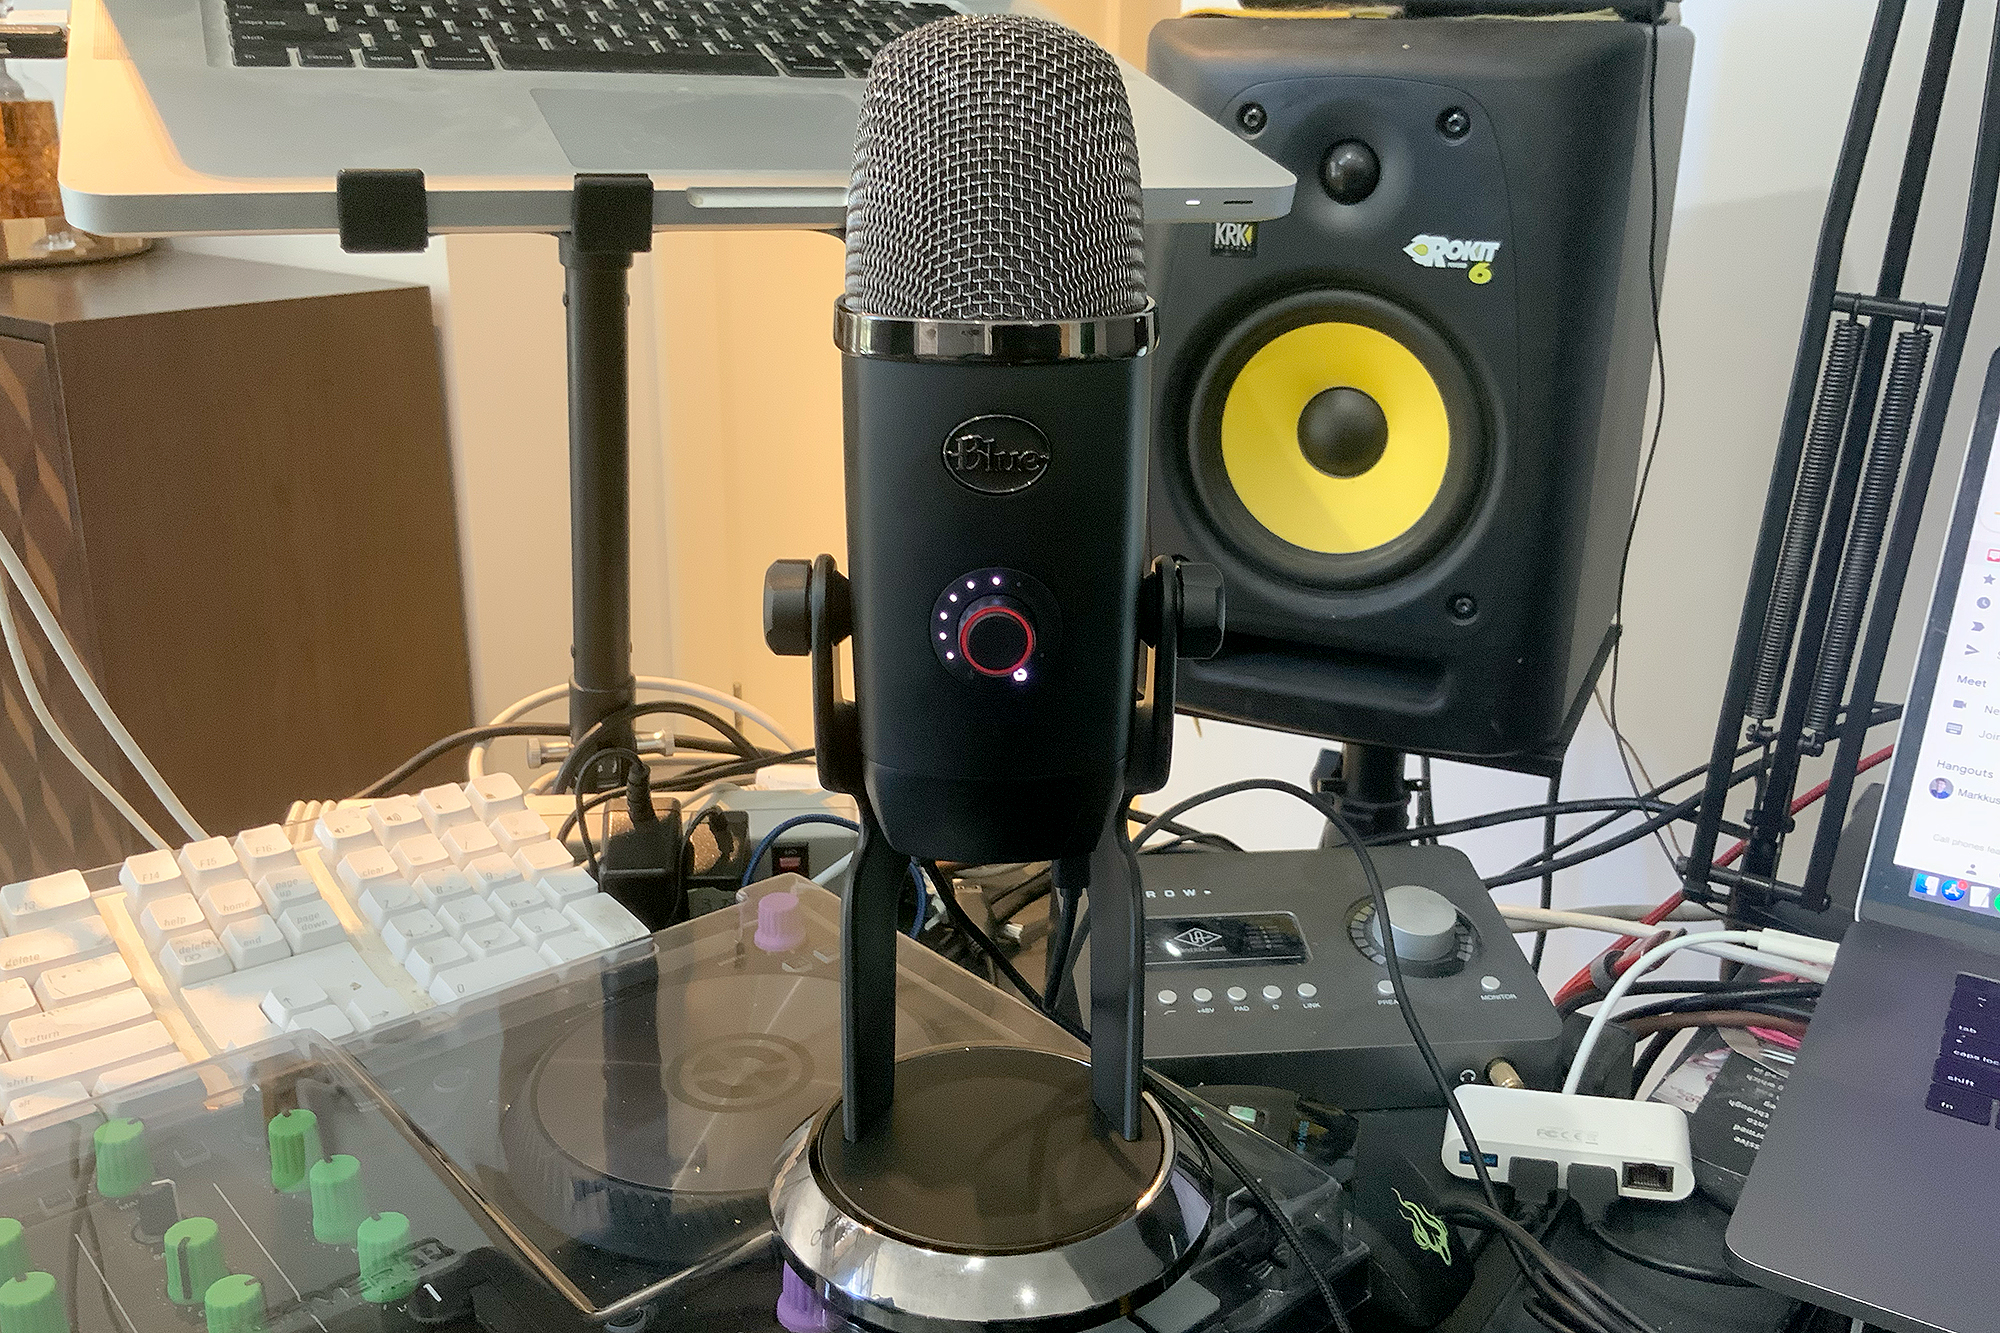 The Blue Yeti X plugged in on a messy Markkus desk